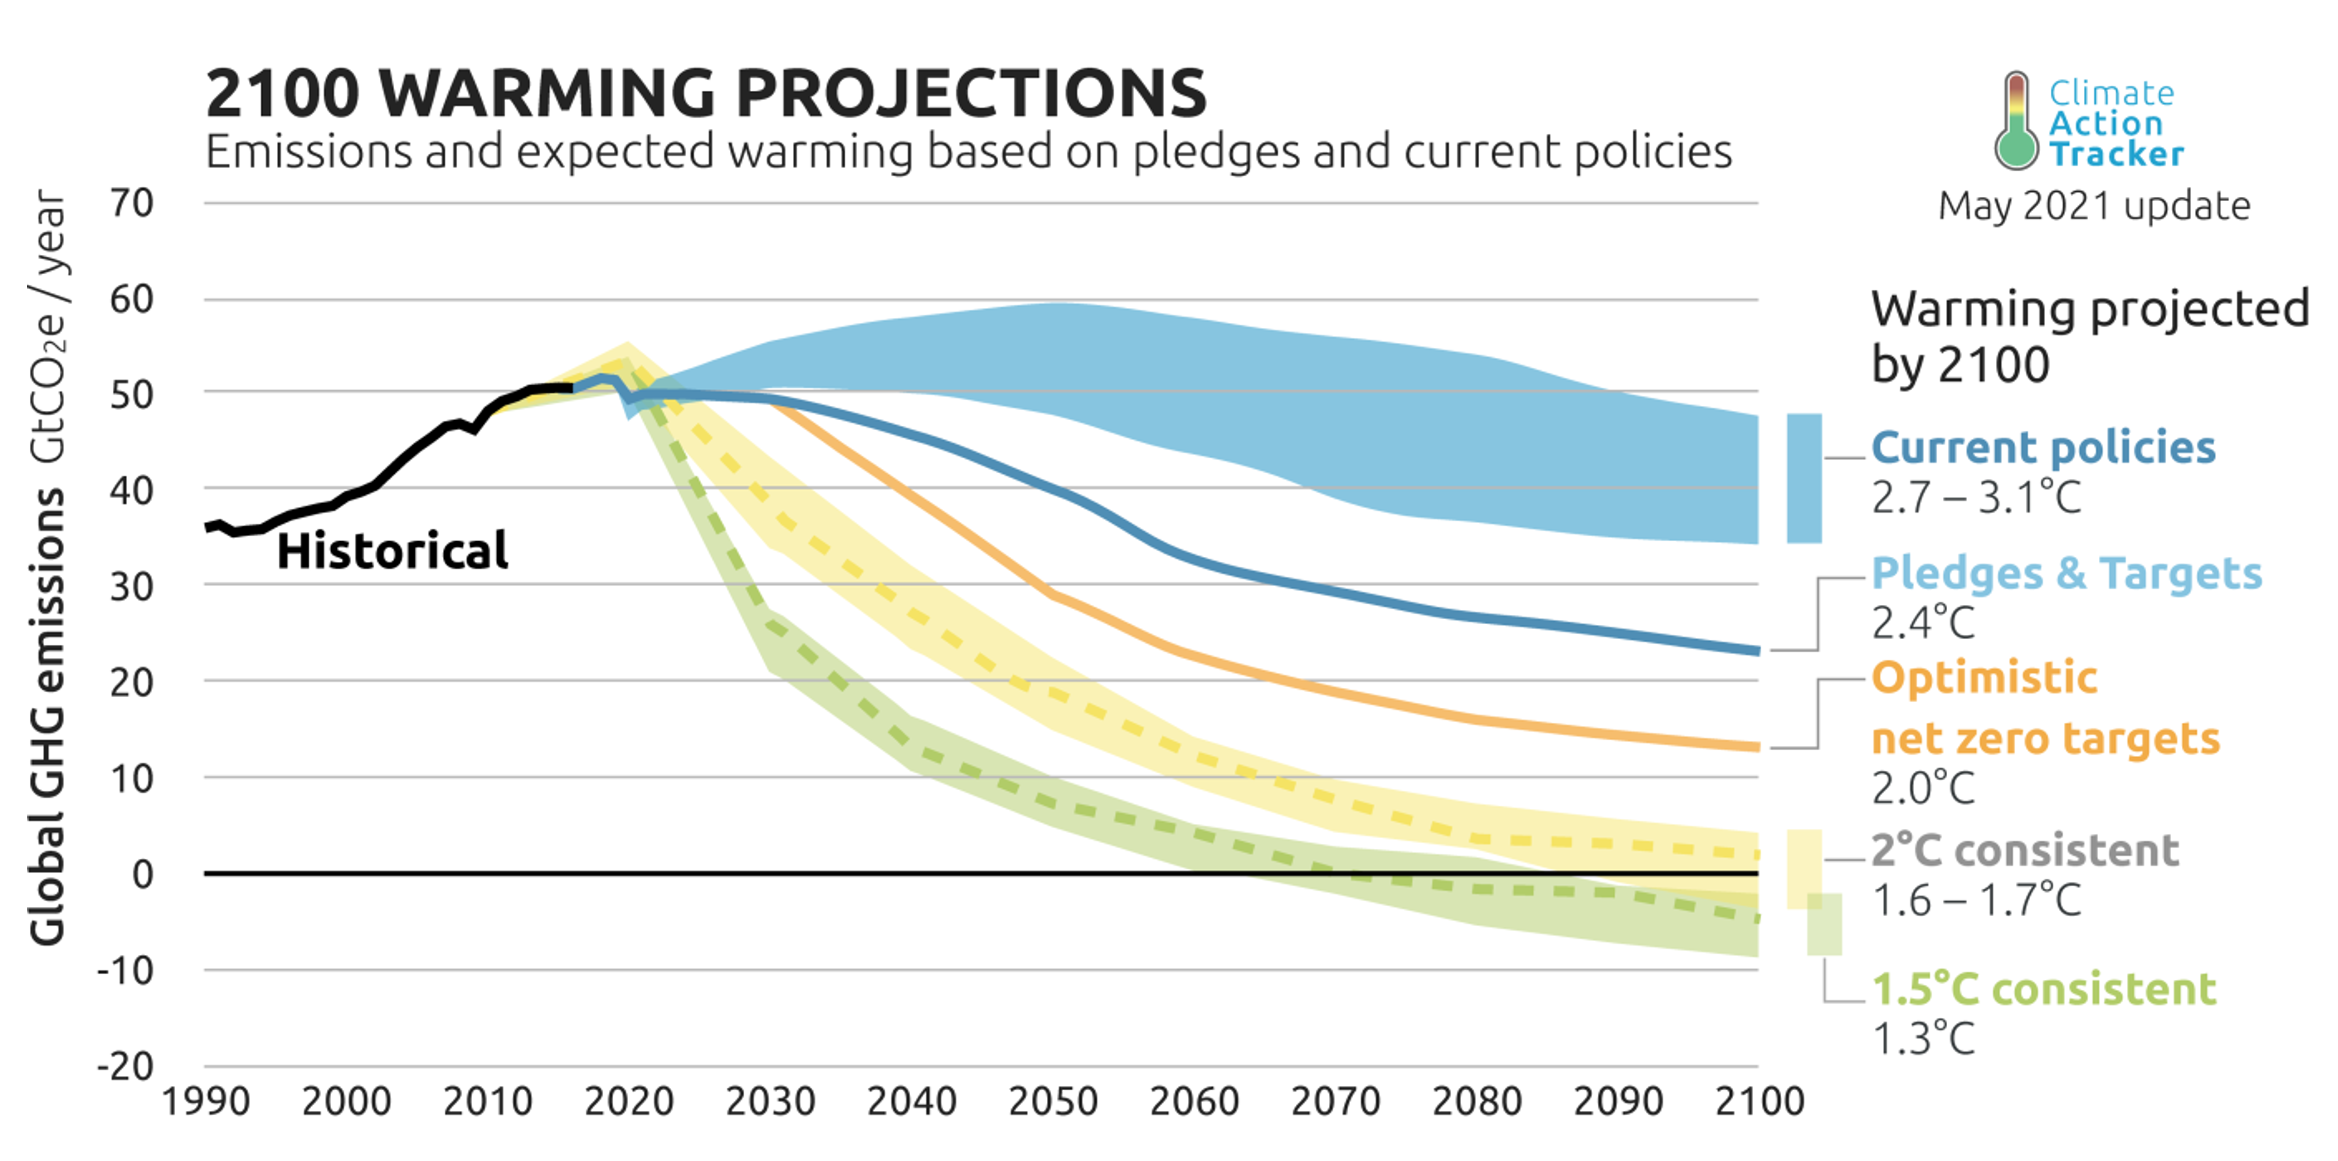 2100 warming projections